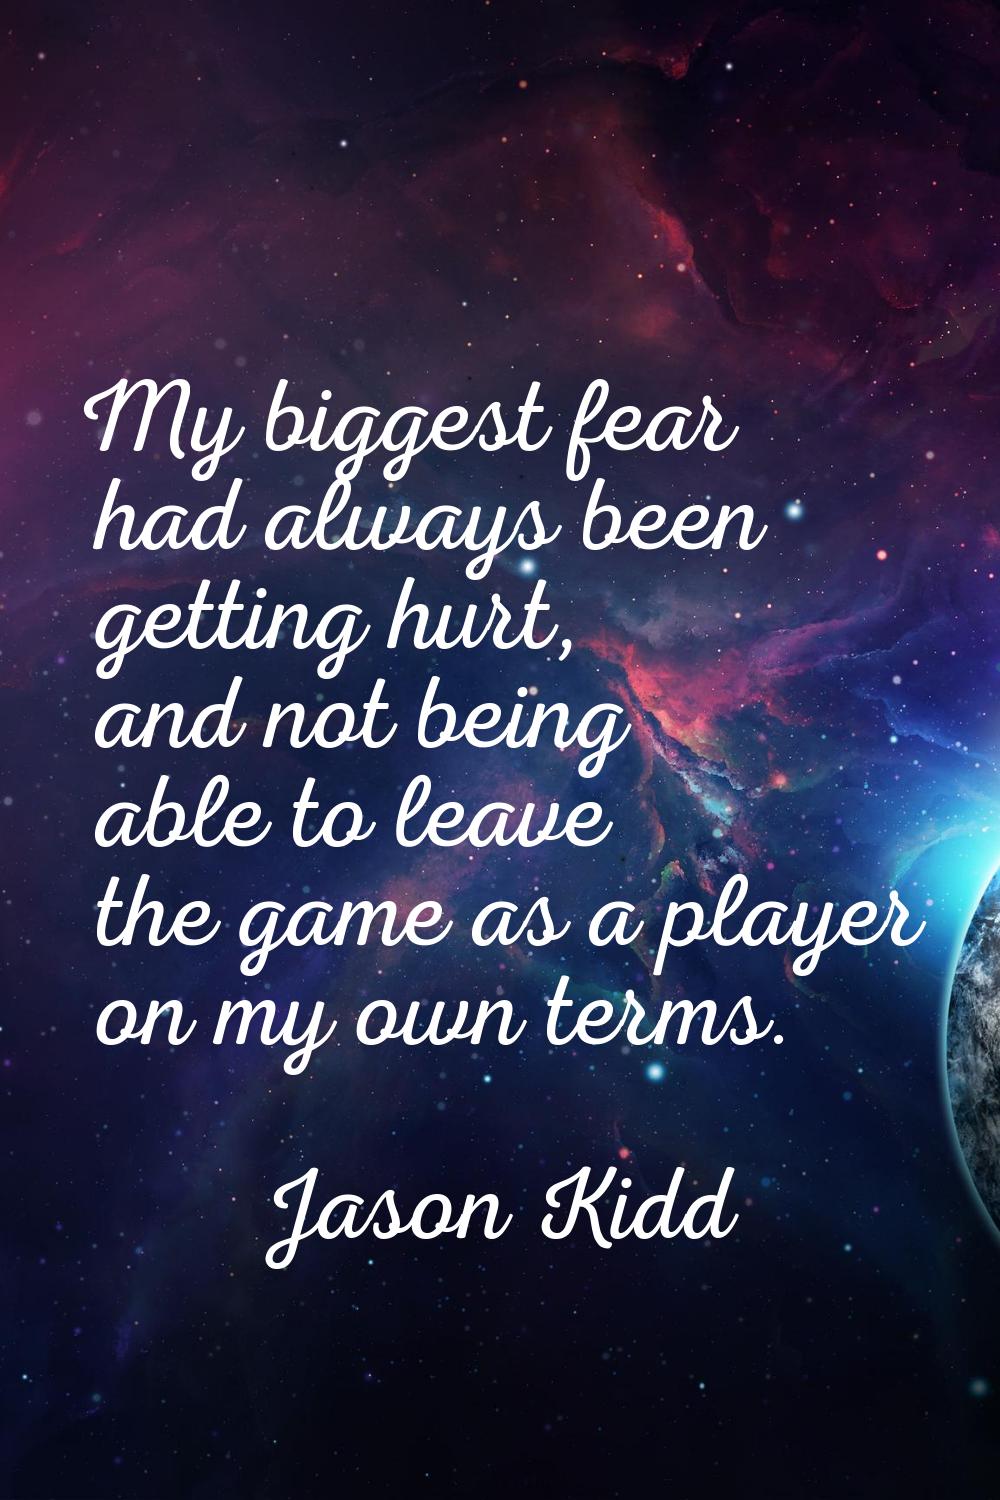 My biggest fear had always been getting hurt, and not being able to leave the game as a player on m